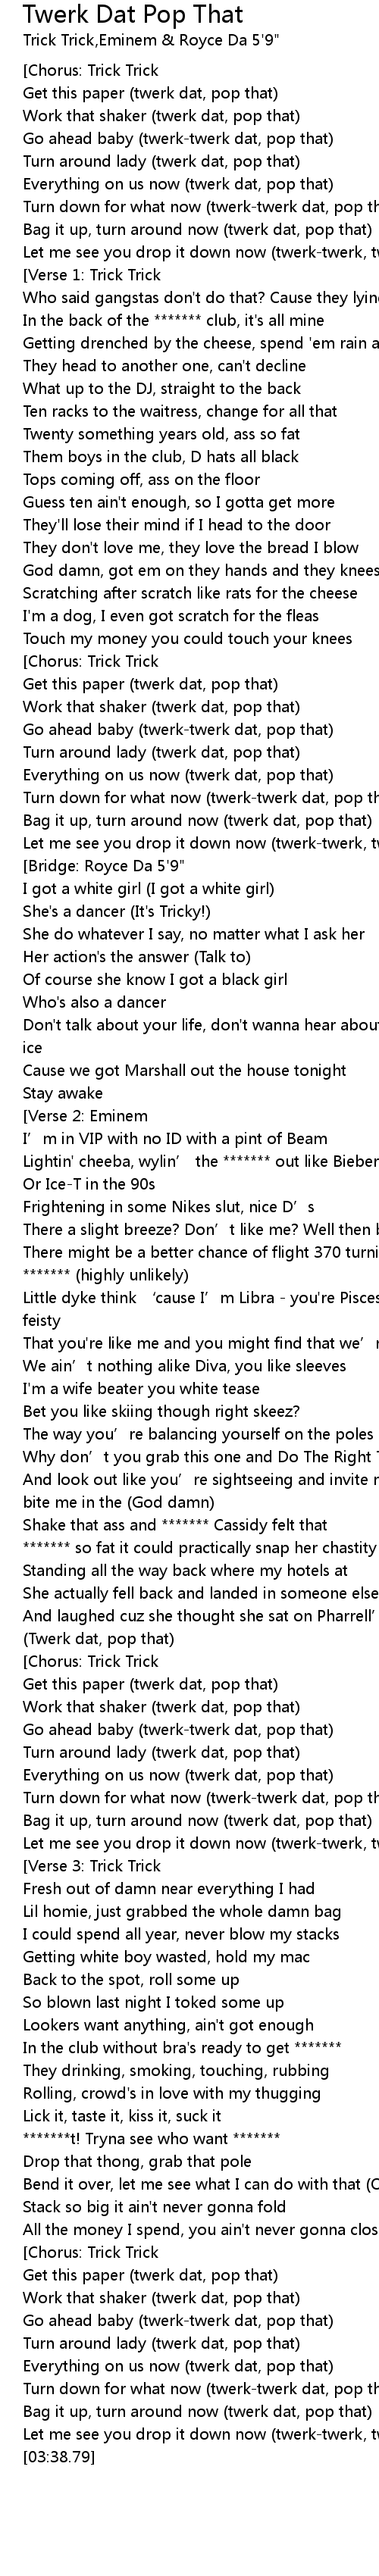 Lyrics what with you twerkin You Can